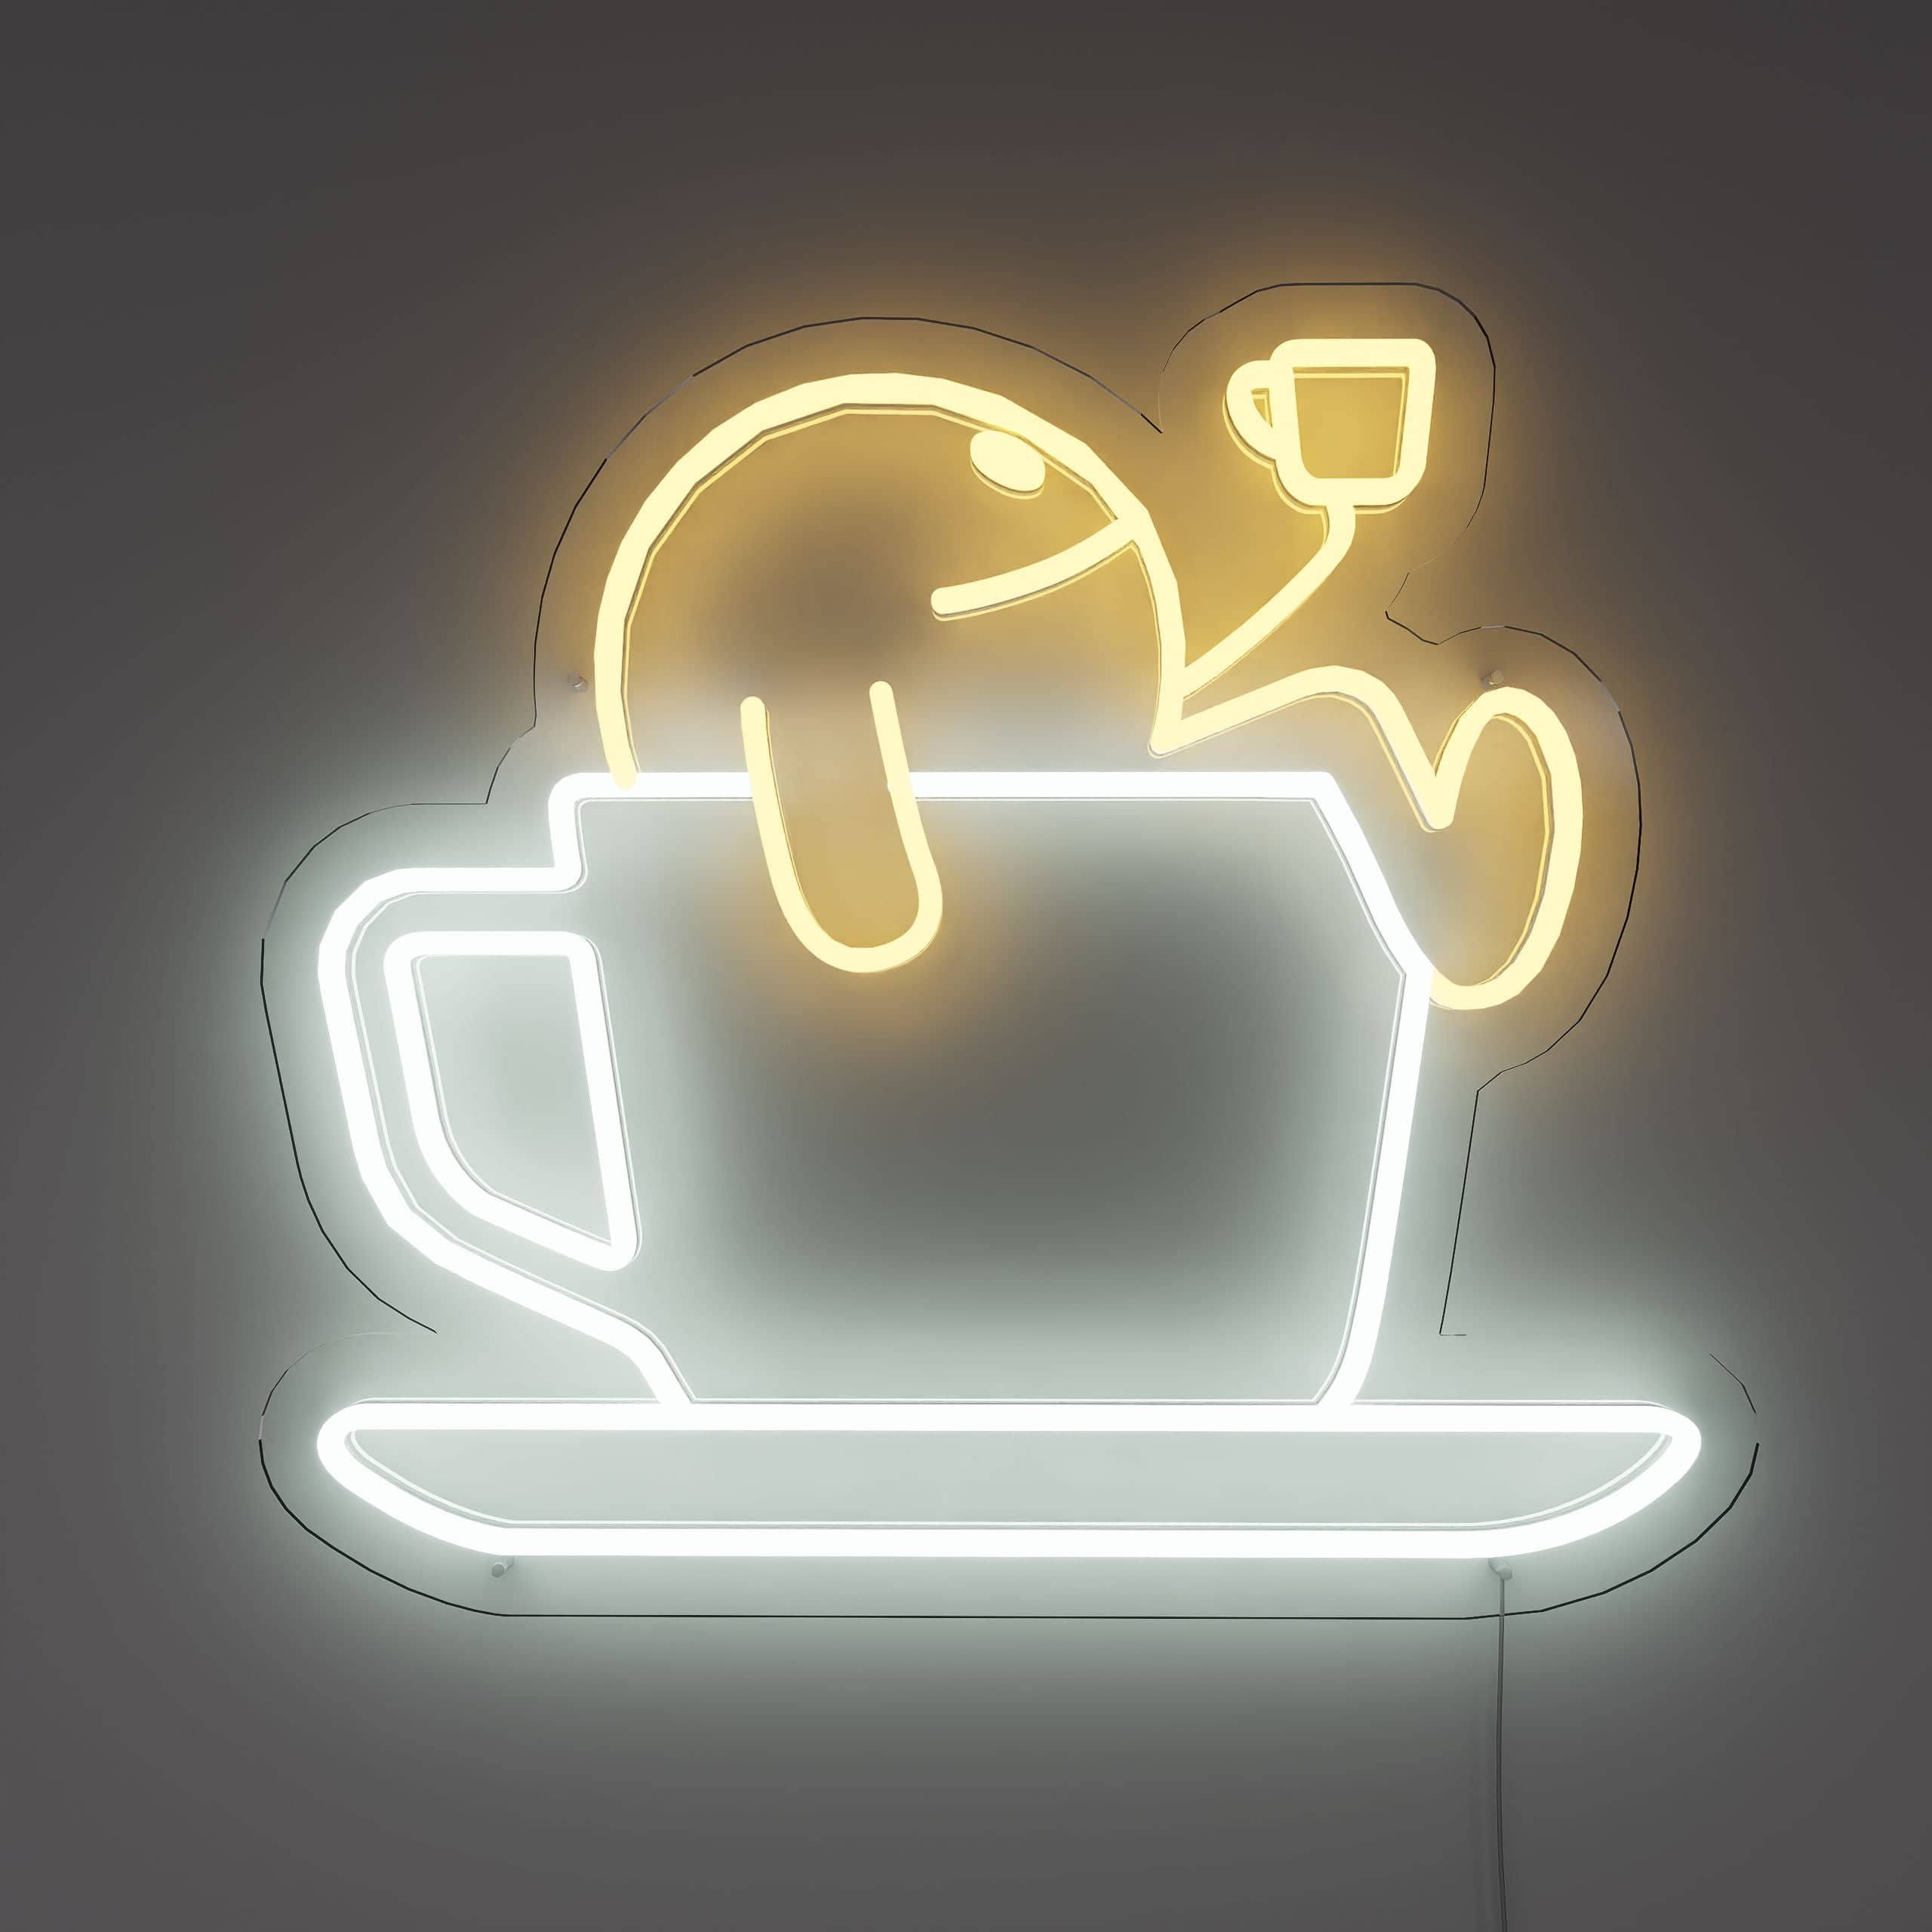 Coffee neon sign inviting you to enjoy a brew